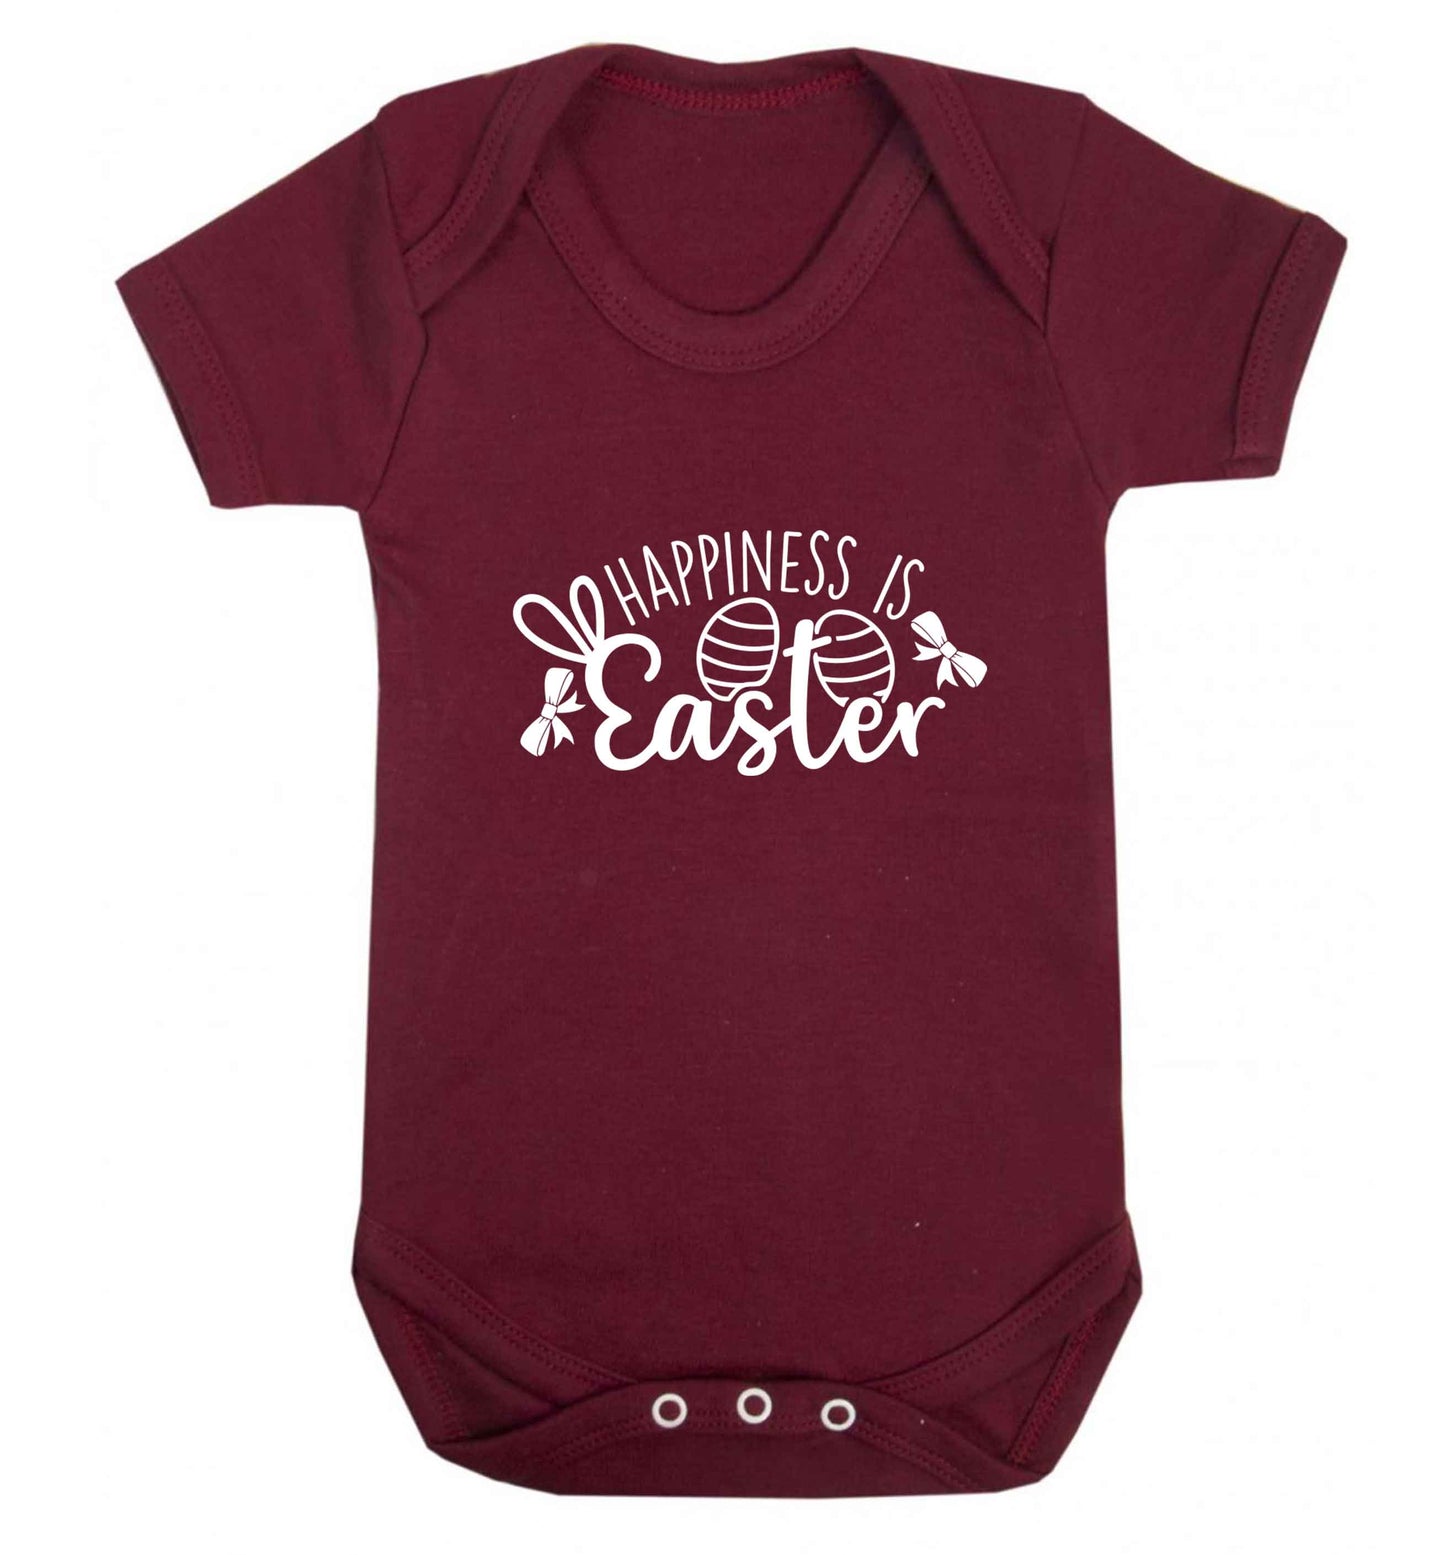 Happiness is easter baby vest maroon 18-24 months